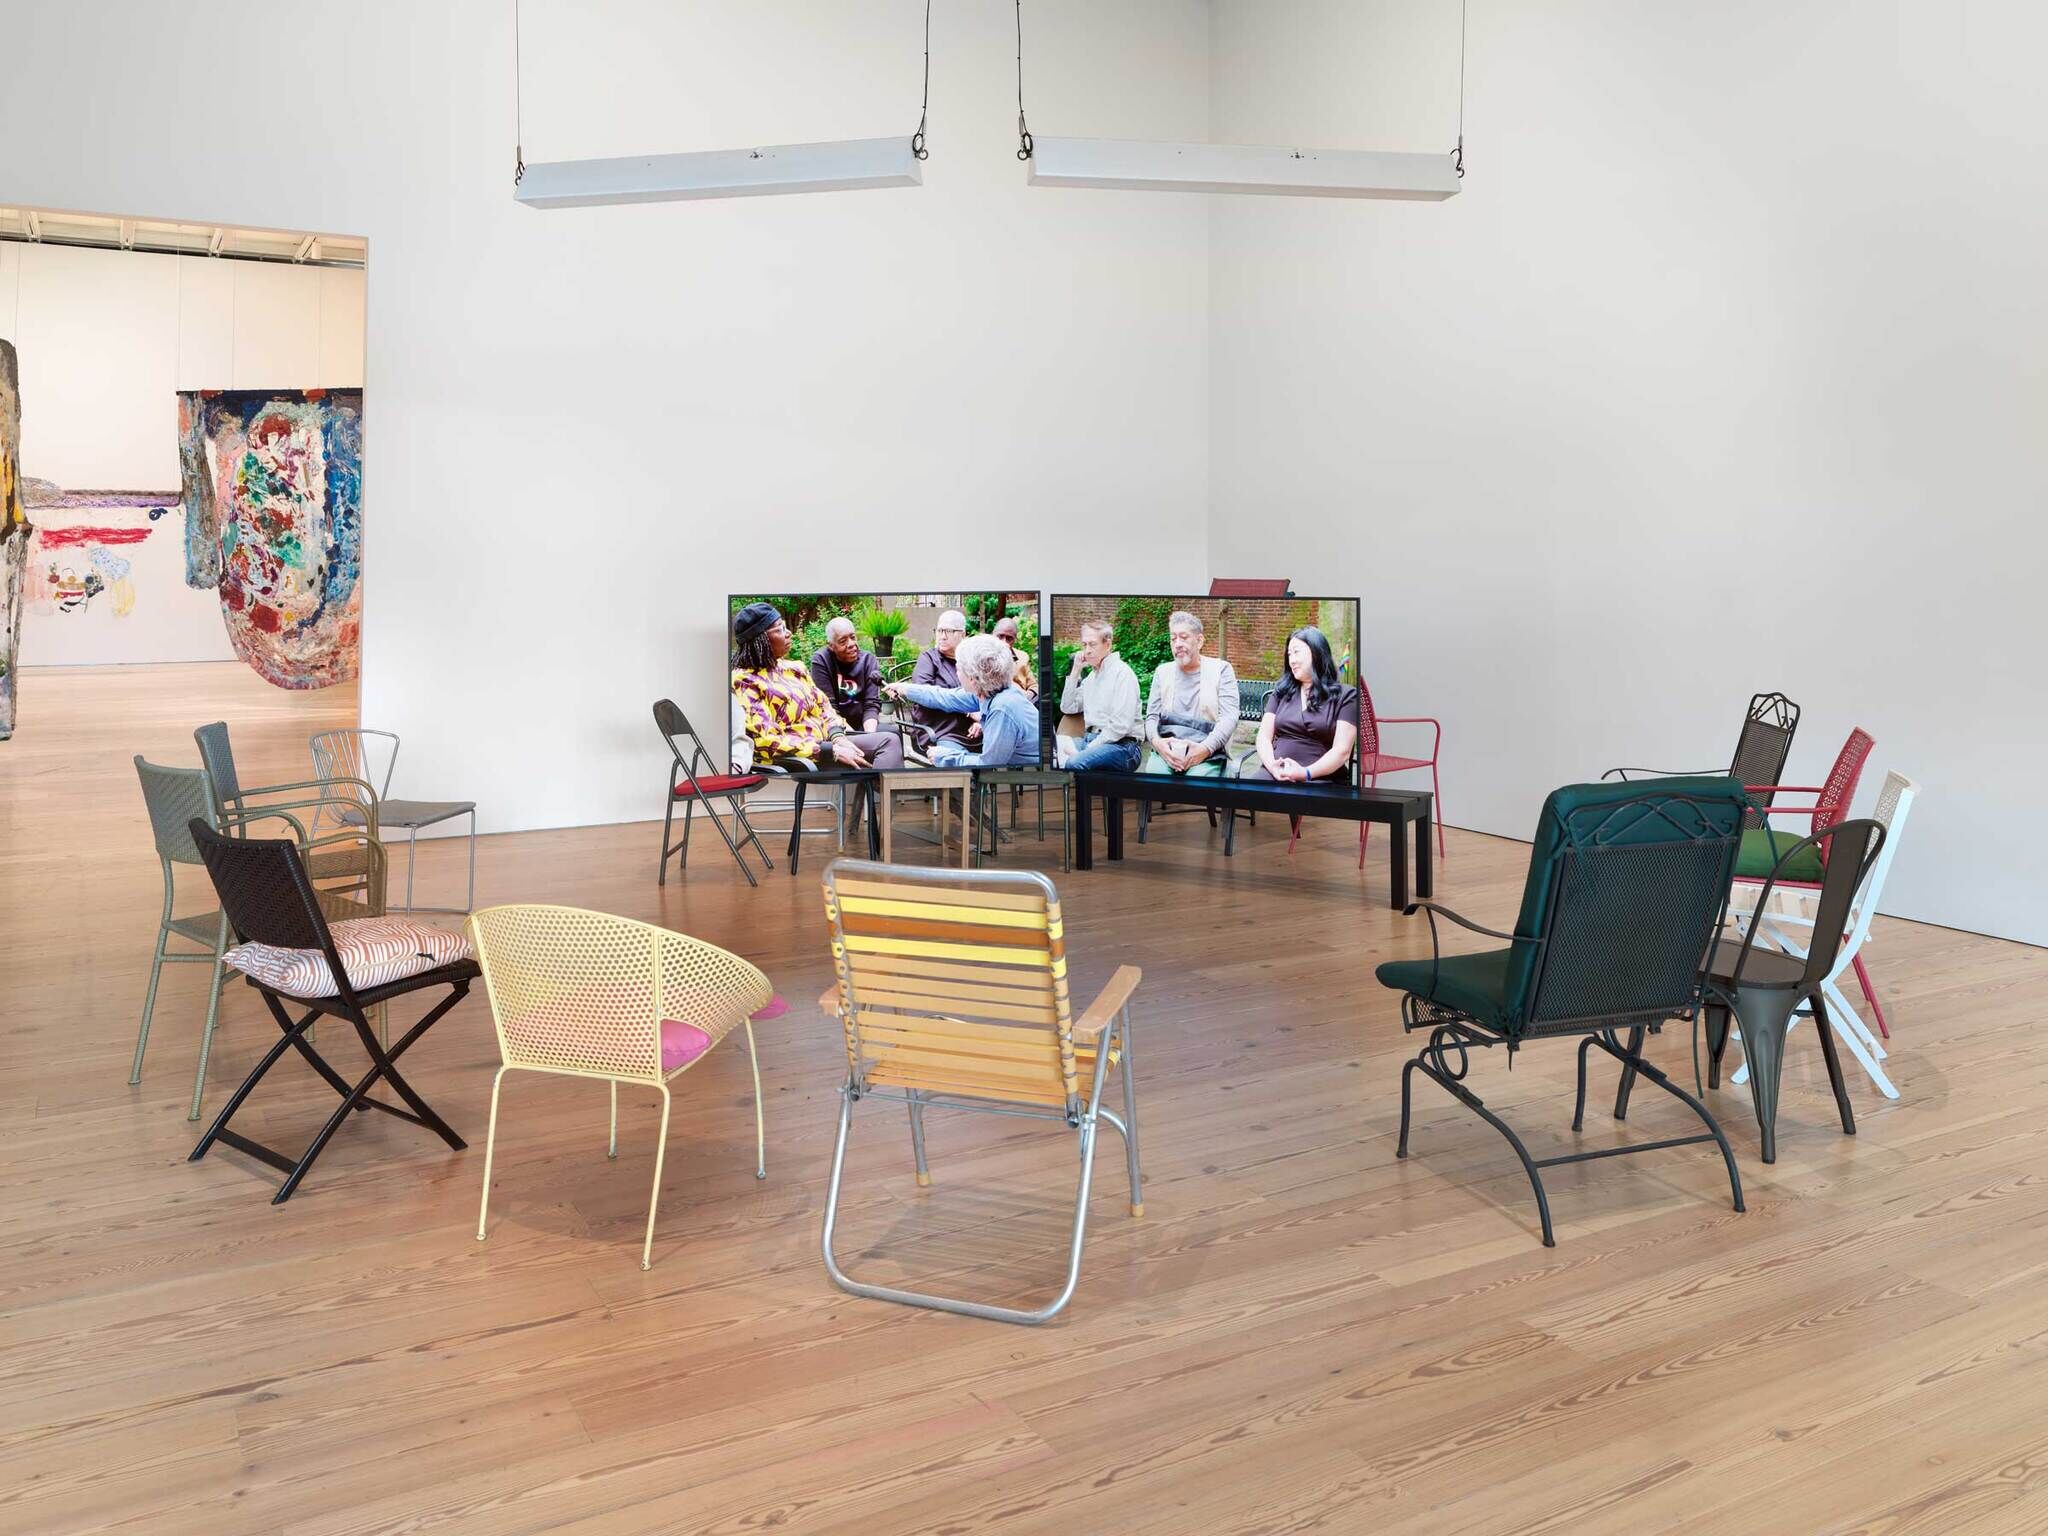 Art gallery interior with colorful chairs scattered around and a large video screen displaying people in conversation.